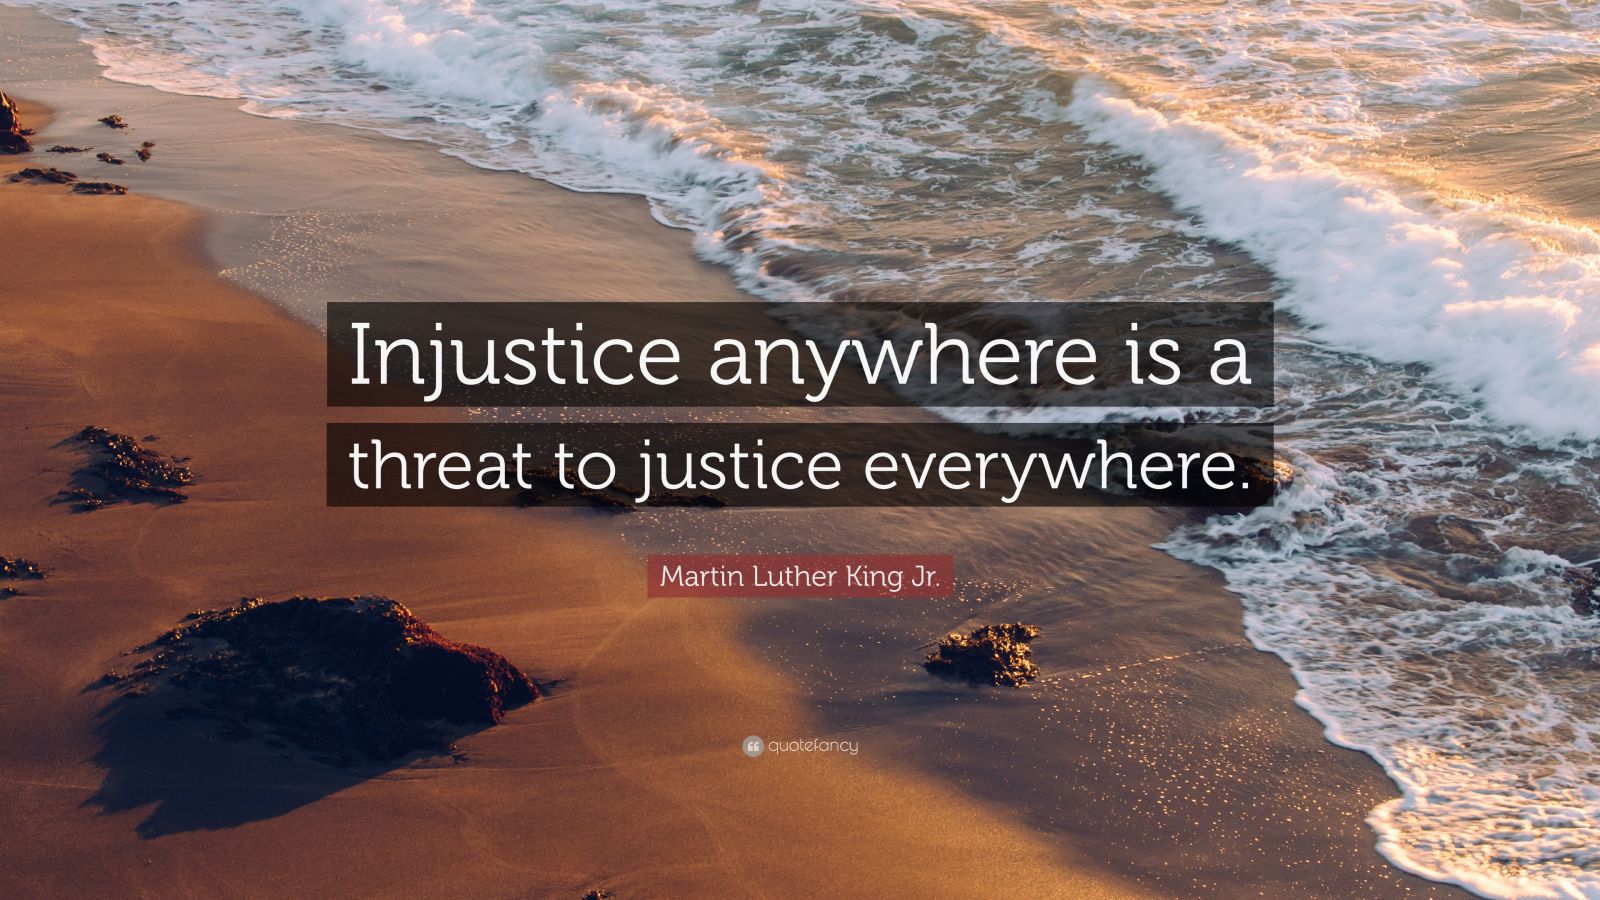 essay on injustice anywhere is a threat to justice